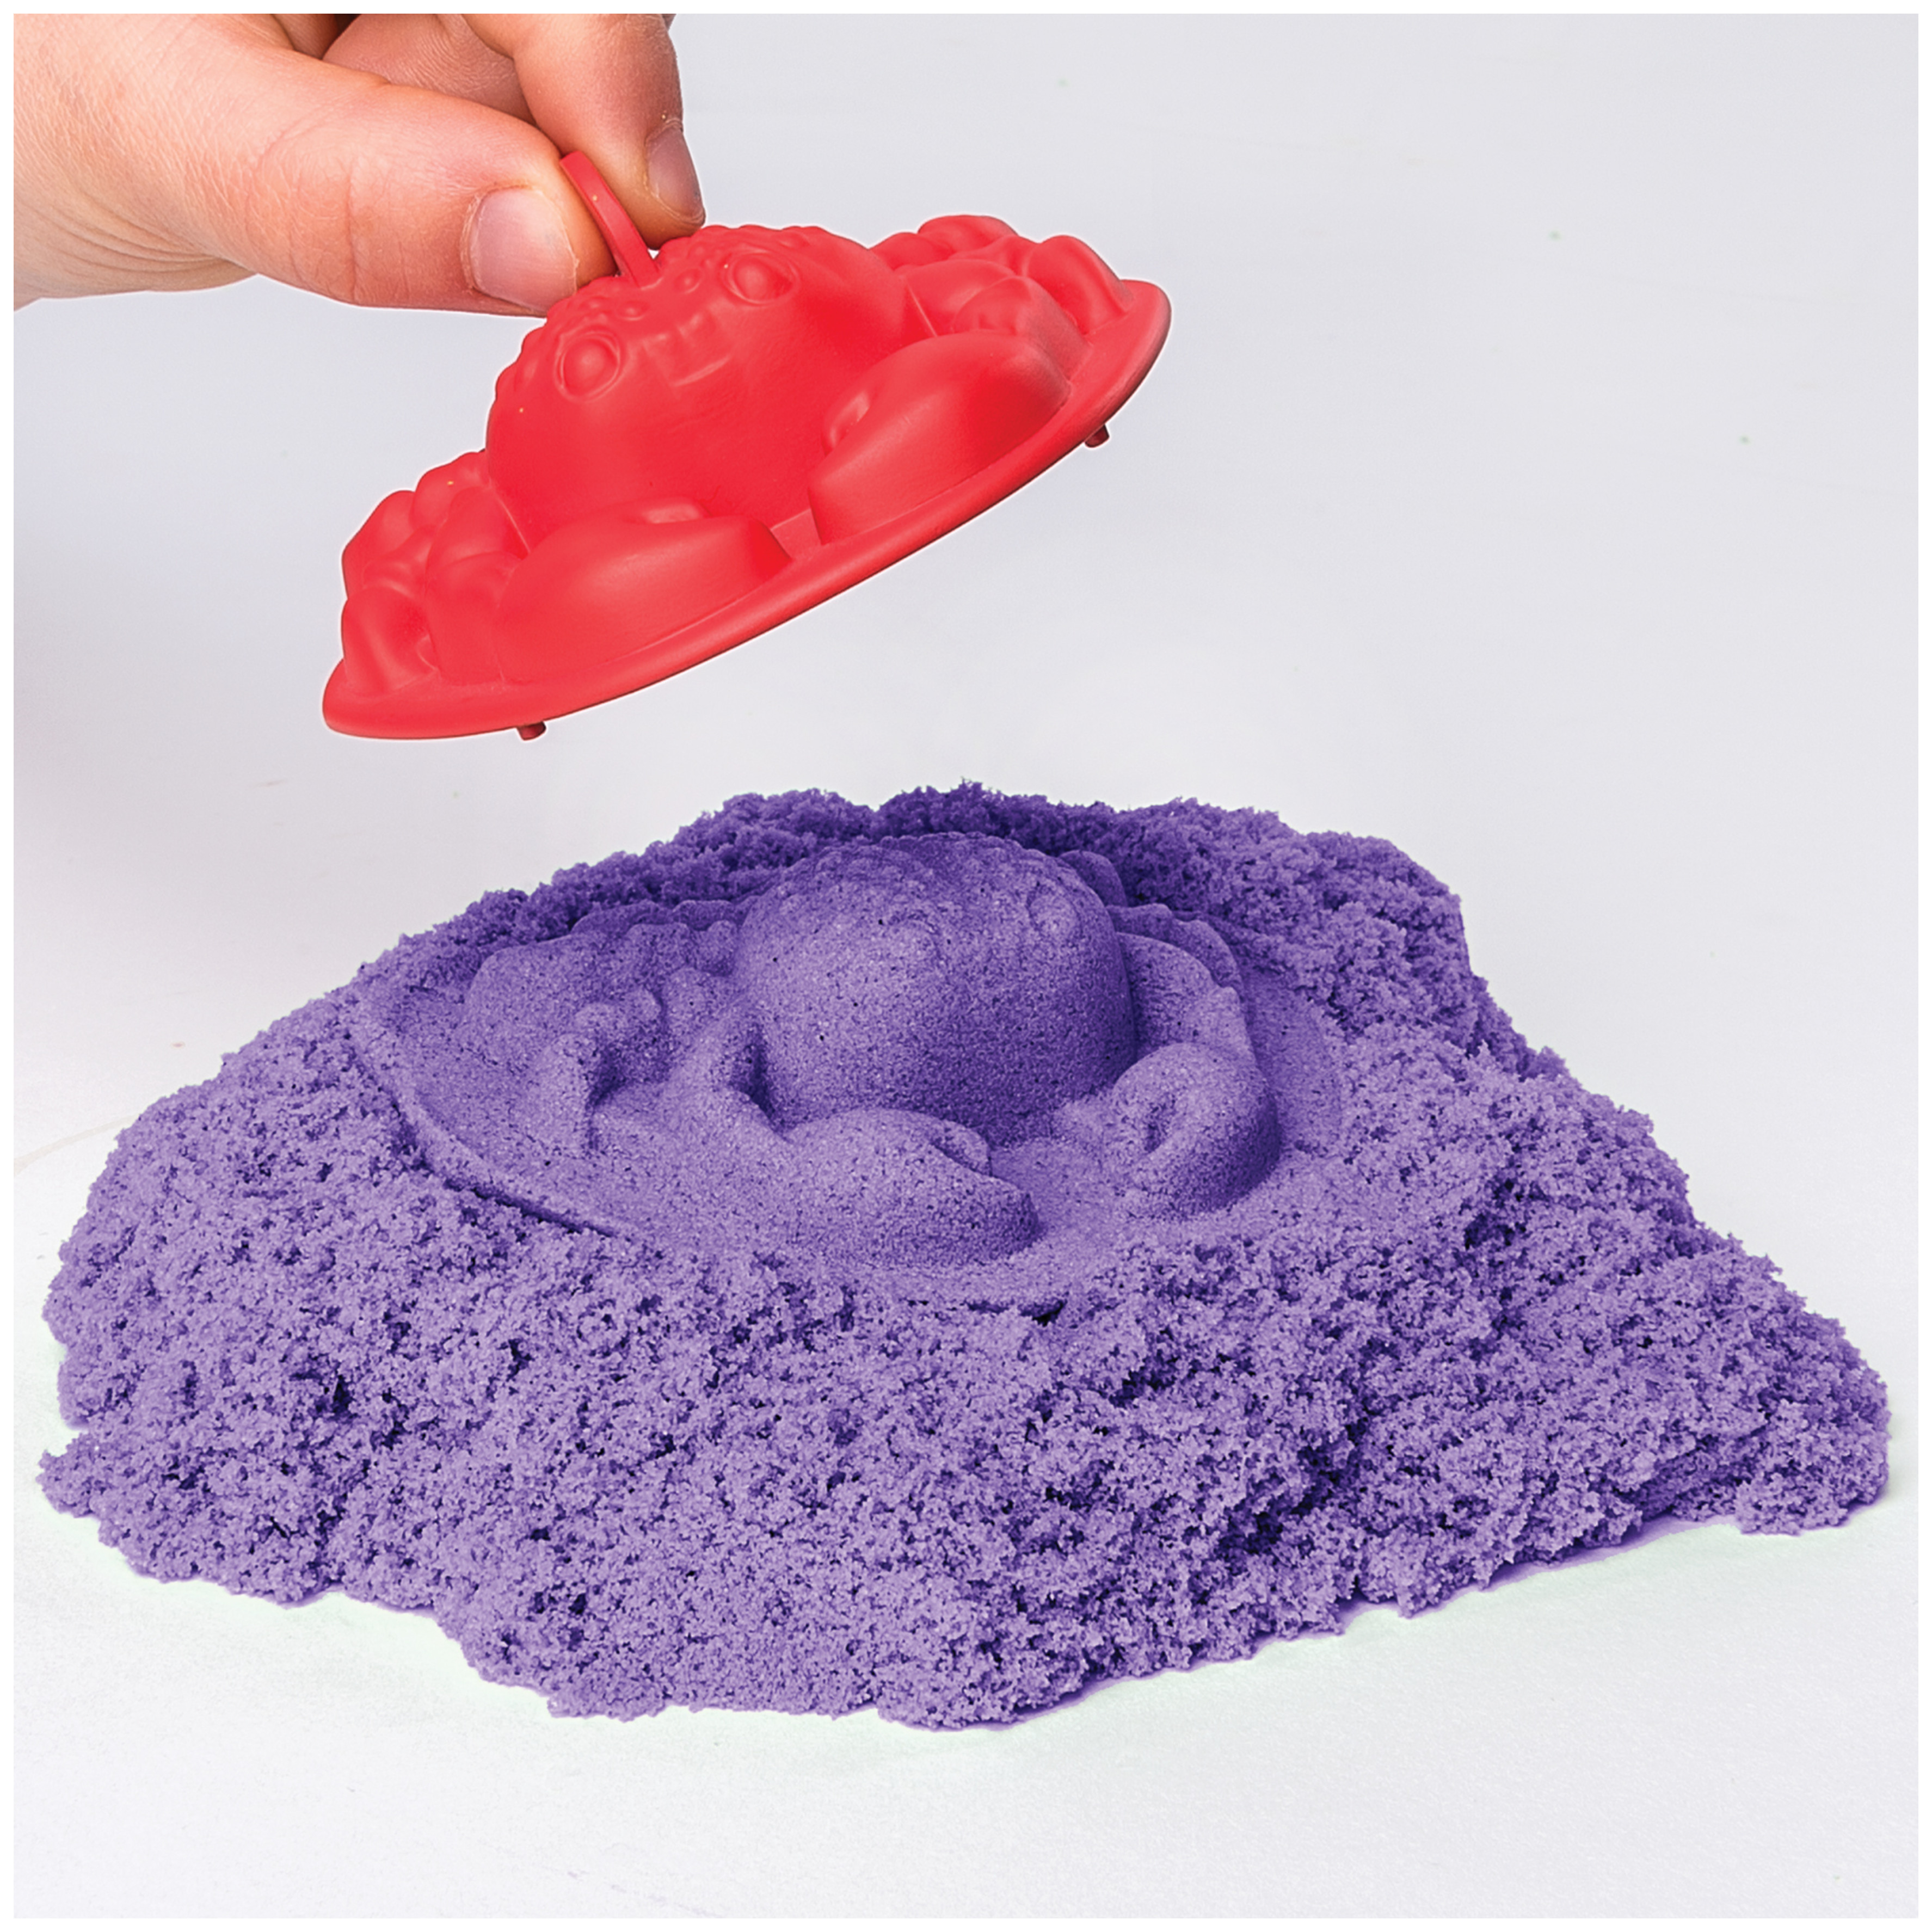 Kinetic Sand, Sandbox Playset with 1lb of Purple Kinetic Sand and 3 Molds, for Ages 3 and up - image 4 of 8